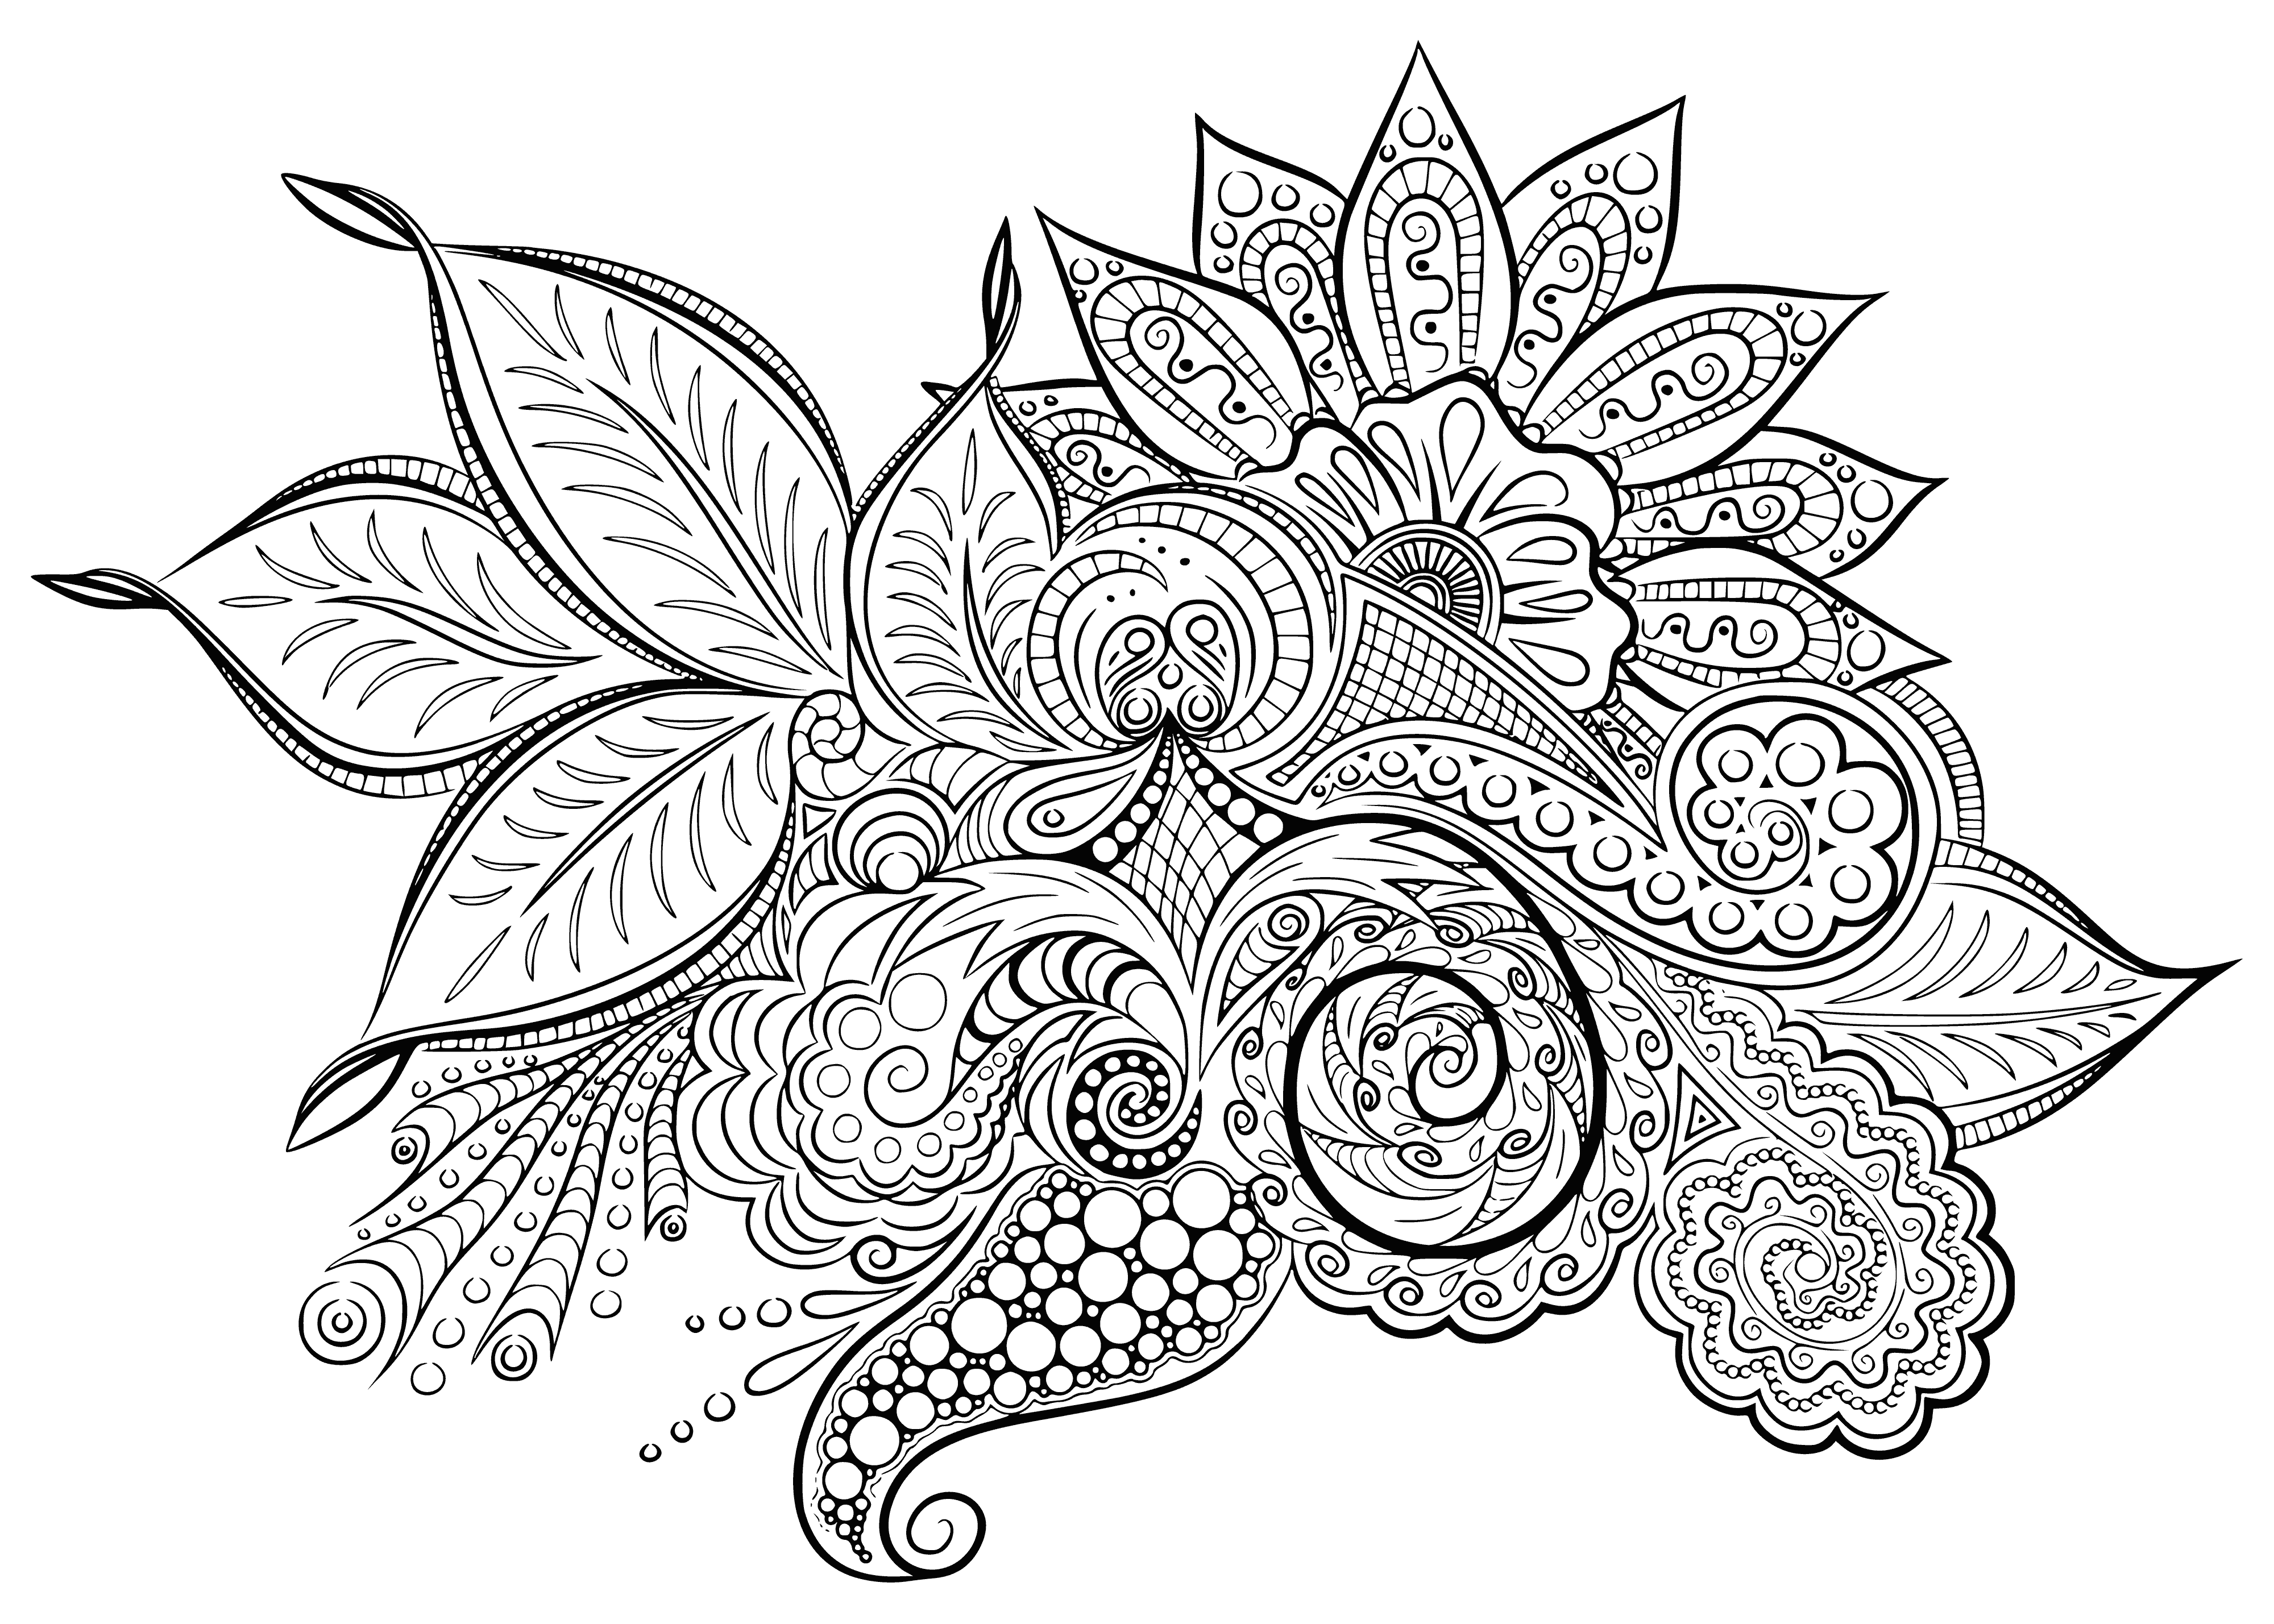 coloring page: A relaxing coloring design with bold black lines and pretty flowers, perfect for those wanting to zone out.